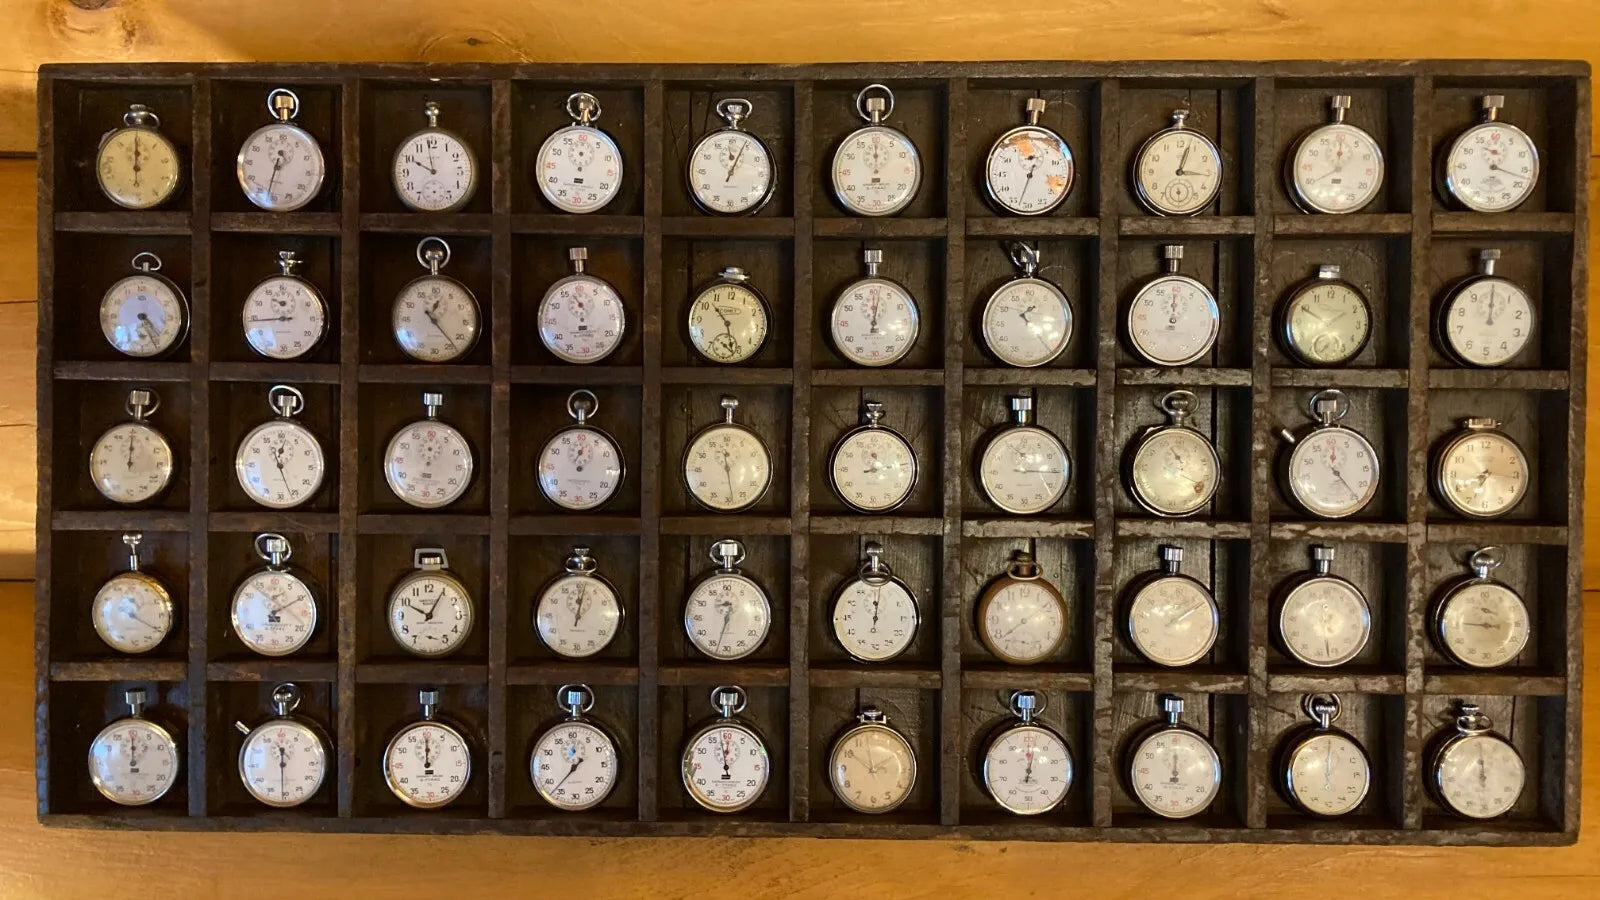 Assortment of vintage stopwatches and pocket watches mounted on a wall display, ideal for restaurant, man cave, or home decor, showcasing a range of designs and eras.